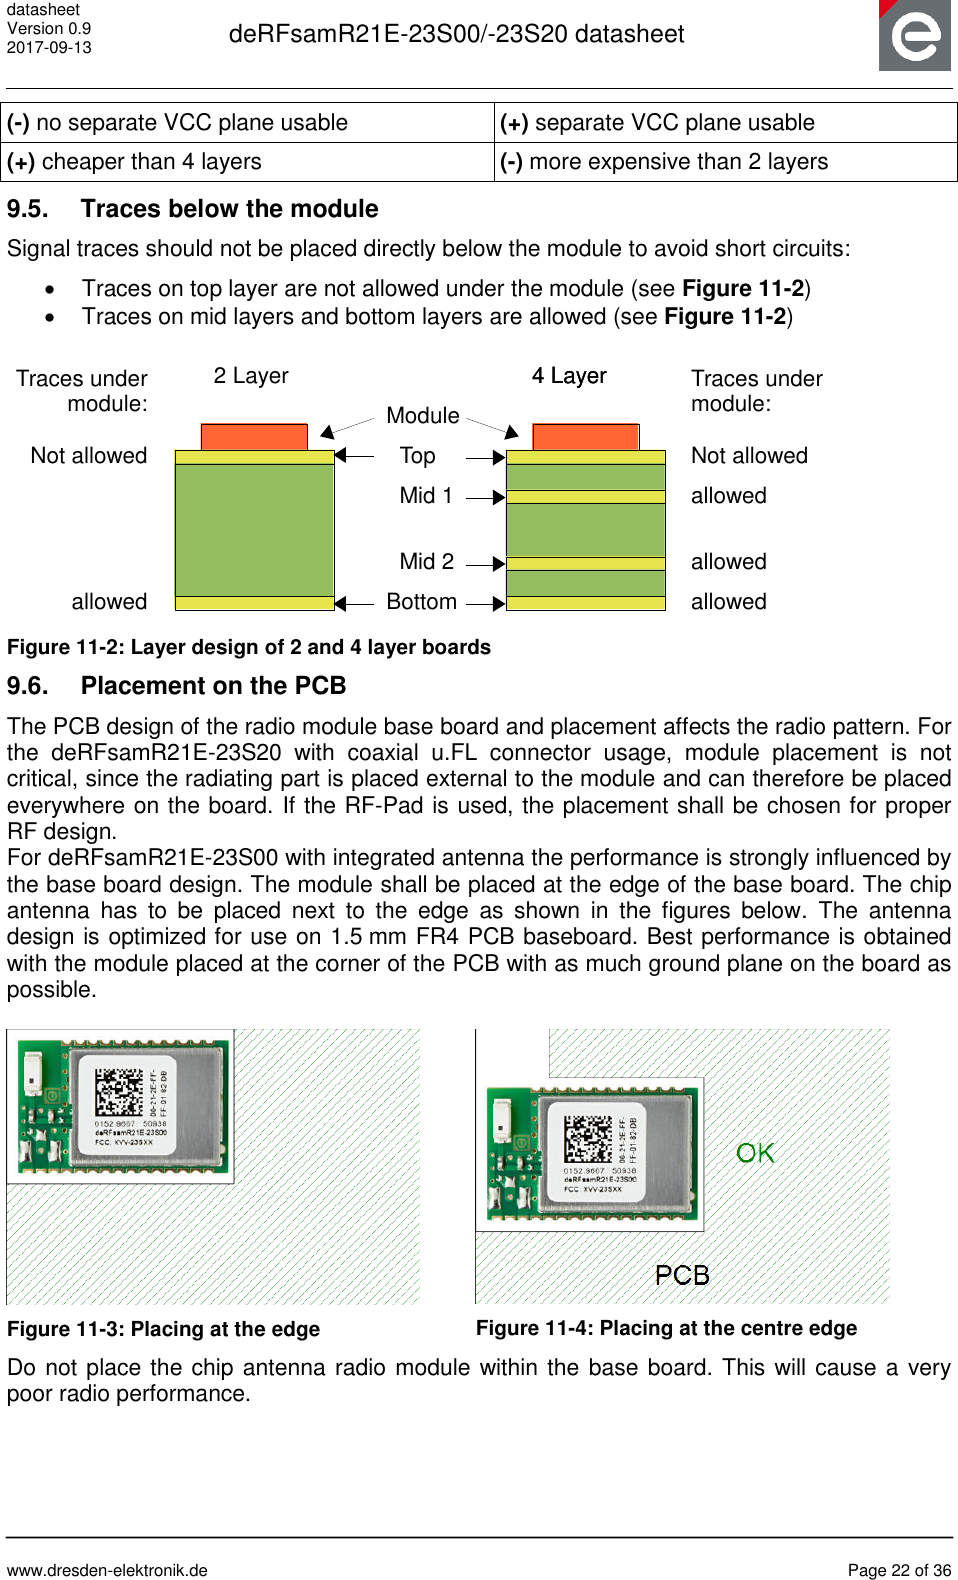 datasheet Version 0.9 2017-09-13  deRFsamR21E-23S00/-23S20 datasheet      www.dresden-elektronik.de  Page 22 of 36  (-) no separate VCC plane usable (+) separate VCC plane usable (+) cheaper than 4 layers (-) more expensive than 2 layers 9.5.  Traces below the module Signal traces should not be placed directly below the module to avoid short circuits:   Traces on top layer are not allowed under the module (see Figure 11-2)   Traces on mid layers and bottom layers are allowed (see Figure 11-2)   Figure 11-2: Layer design of 2 and 4 layer boards 9.6.  Placement on the PCB The PCB design of the radio module base board and placement affects the radio pattern. For the  deRFsamR21E-23S20  with  coaxial  u.FL  connector  usage,  module  placement  is  not critical, since the radiating part is placed external to the module and can therefore be placed everywhere on the board. If the RF-Pad is used, the placement shall be chosen for proper RF design.  For deRFsamR21E-23S00 with integrated antenna the performance is strongly influenced by the base board design. The module shall be placed at the edge of the base board. The chip antenna  has  to  be  placed  next  to  the  edge  as  shown  in  the  figures  below.  The  antenna design is optimized for use on 1.5 mm FR4 PCB baseboard. Best performance is obtained with the module placed at the corner of the PCB with as much ground plane on the board as possible.   Figure 11-3: Placing at the edge  Figure 11-4: Placing at the centre edge Do not place the chip antenna radio module within the base board. This will cause a very poor radio performance.  TopBottomMid 1Mid 22 Layer 4 LayerModule4 Layer Traces under module:Not allowedallowedallowedallowedTraces under module:Not allowedallowed